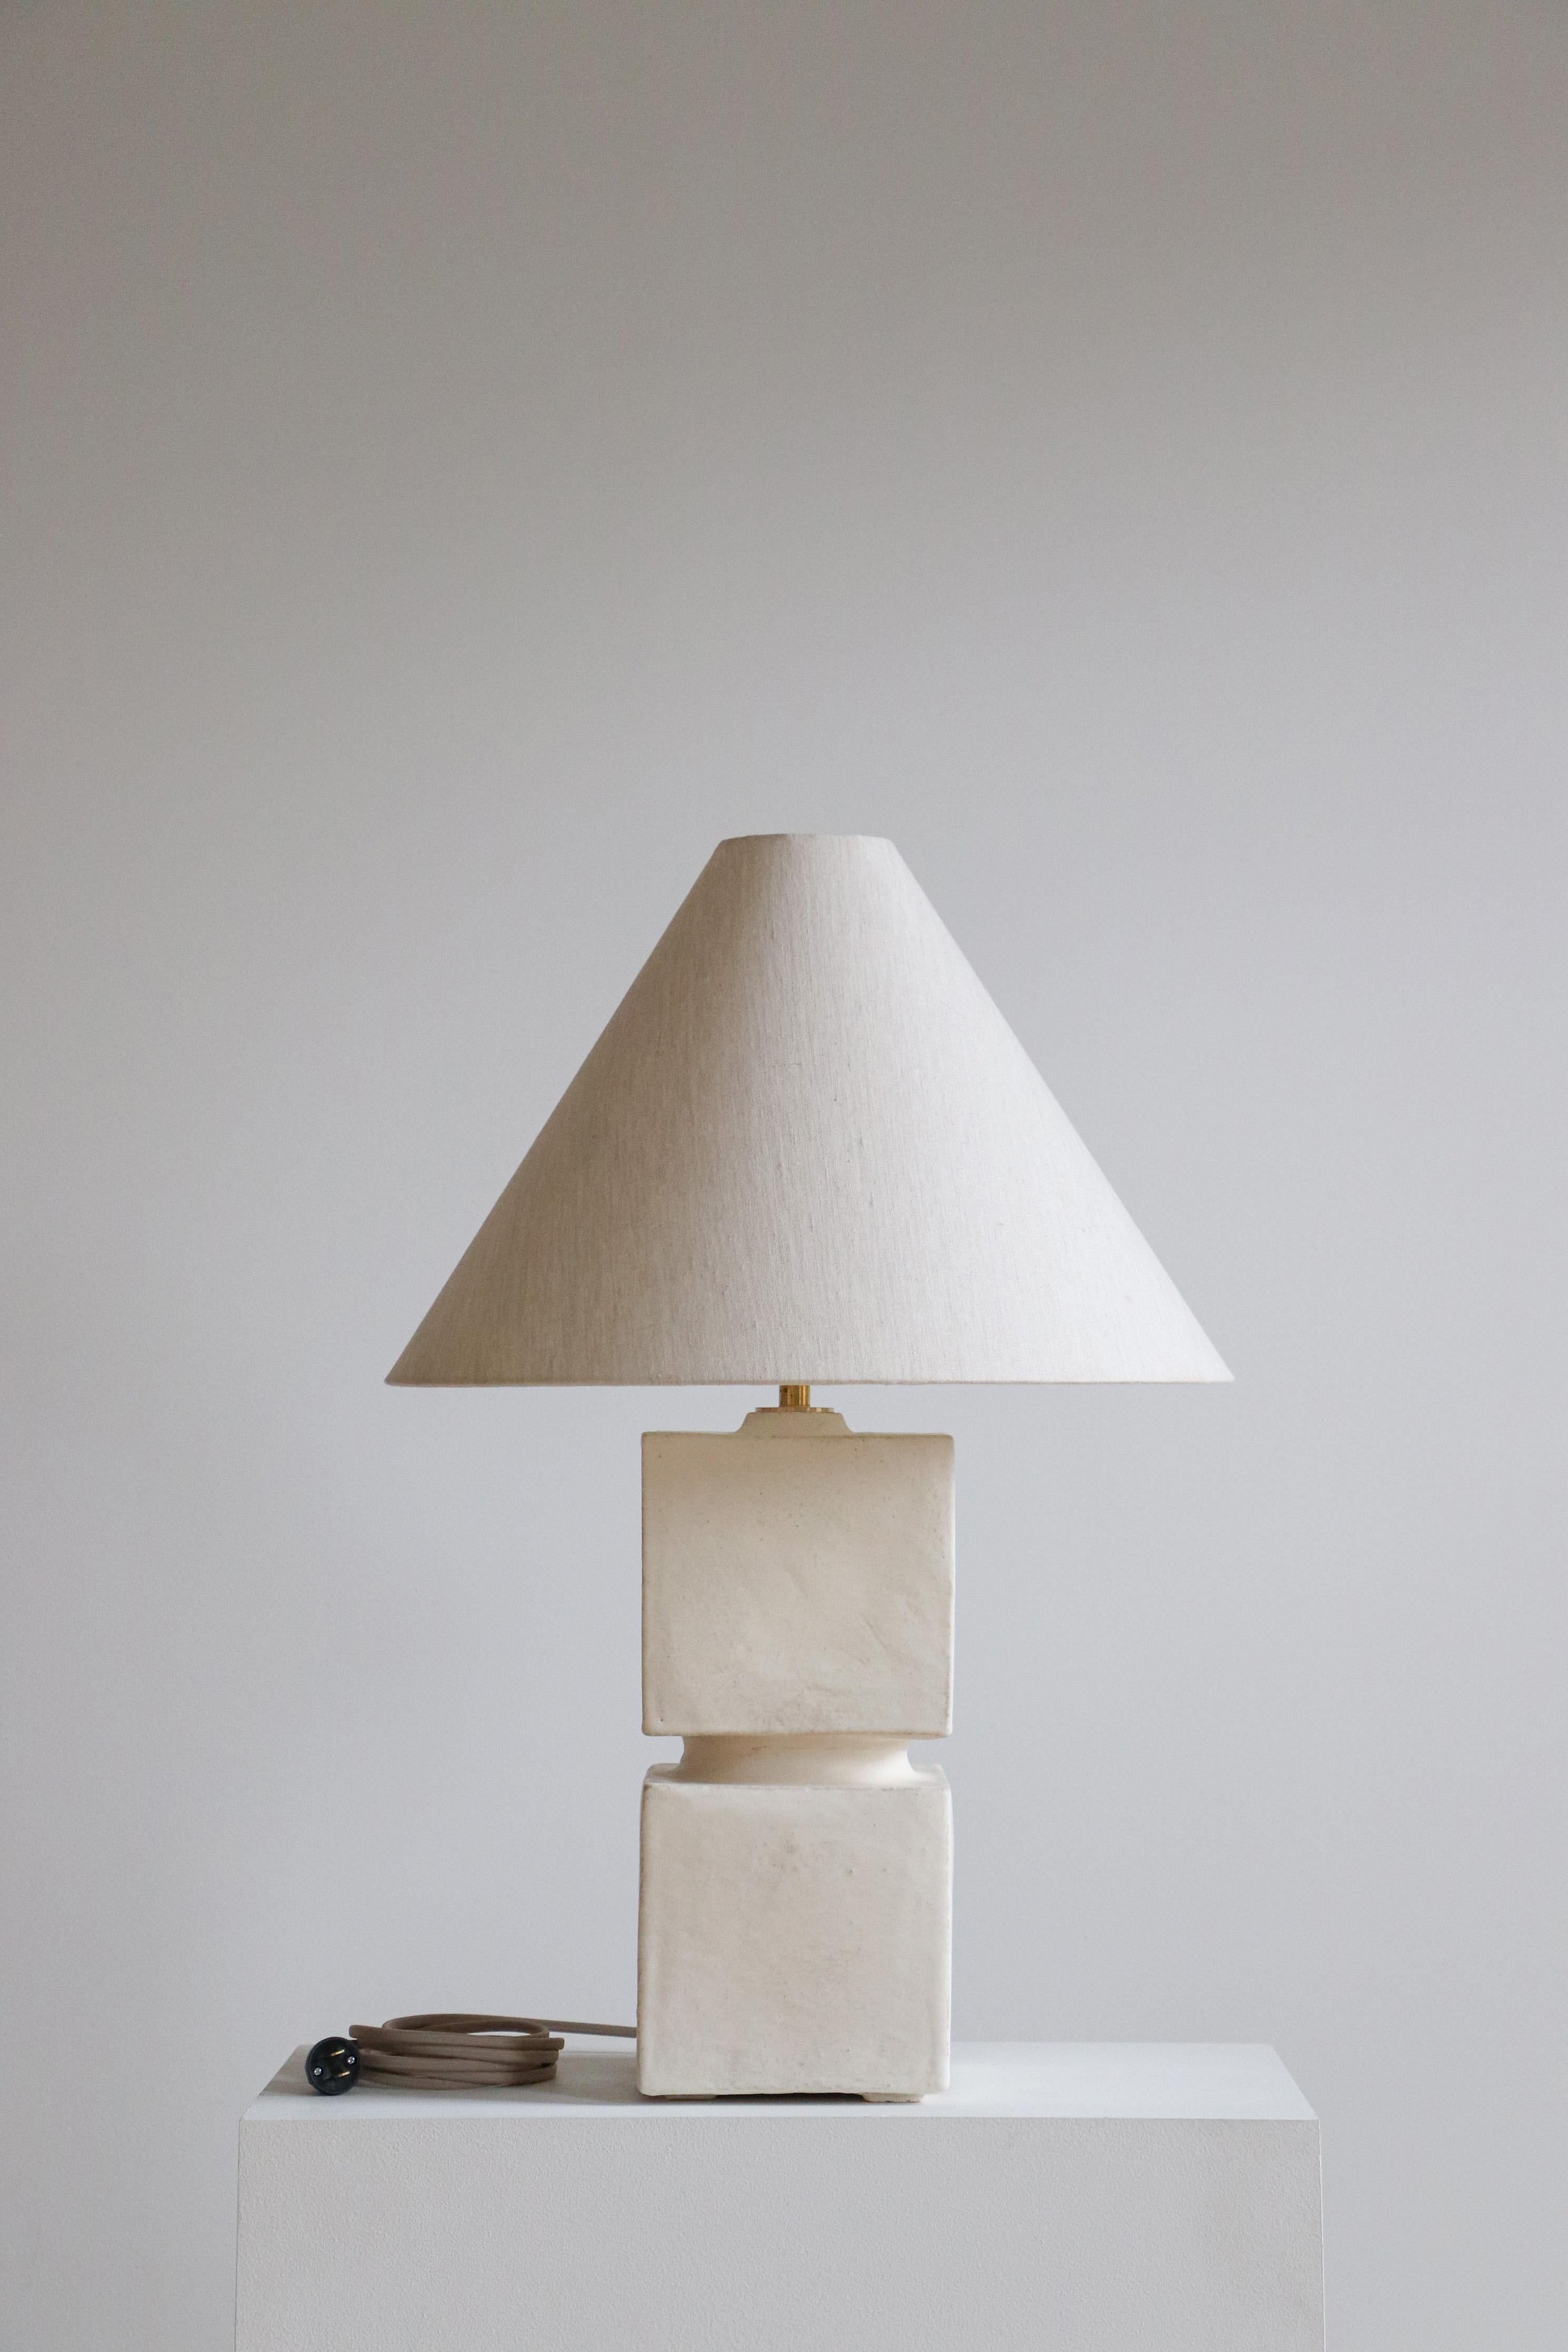 Stone Talis Table Lamp by Danny Kaplan Studio
Dimensions: ⌀ 51 x H 76 cm
Materials: Glazed Ceramic, Unfinished Brass, Wax Paper

This item is handmade, and may exhibit variability within the same piece. We do our best to maintain a consistent